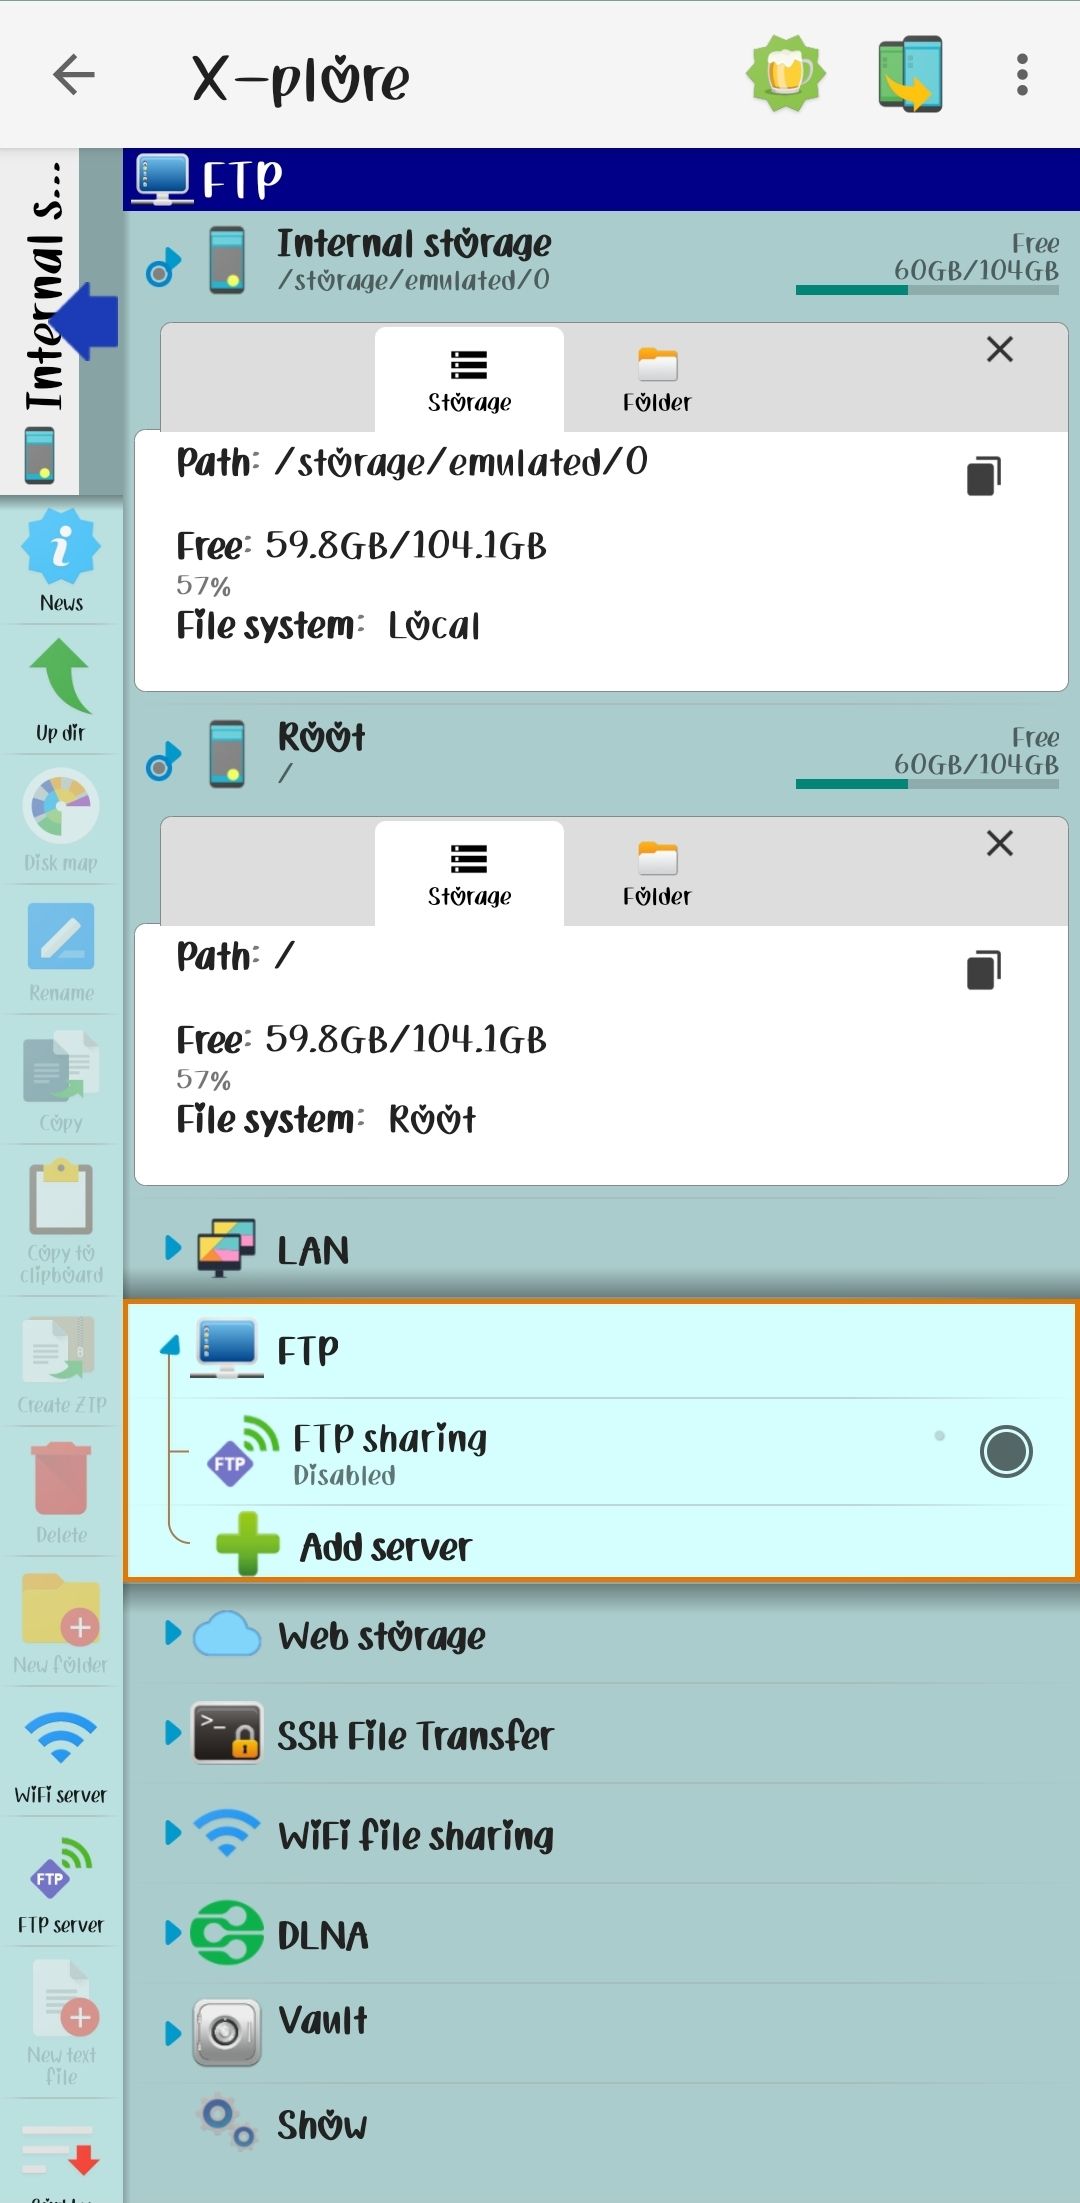 Android File Manager - X-plore